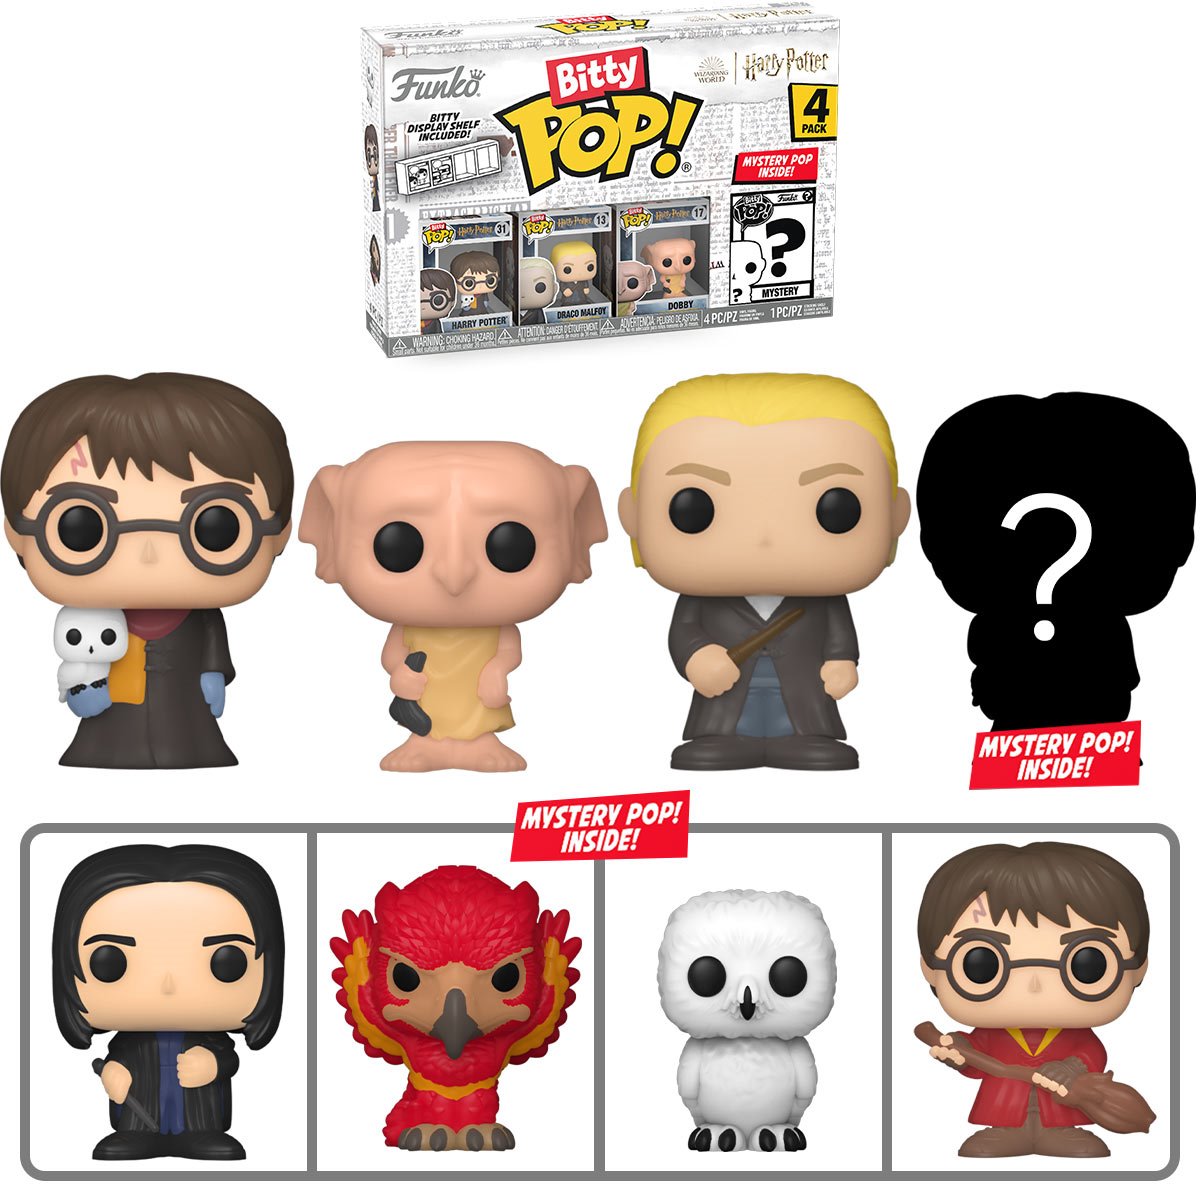 Bitty Pop! Harry Potter 4-Pack Series 1